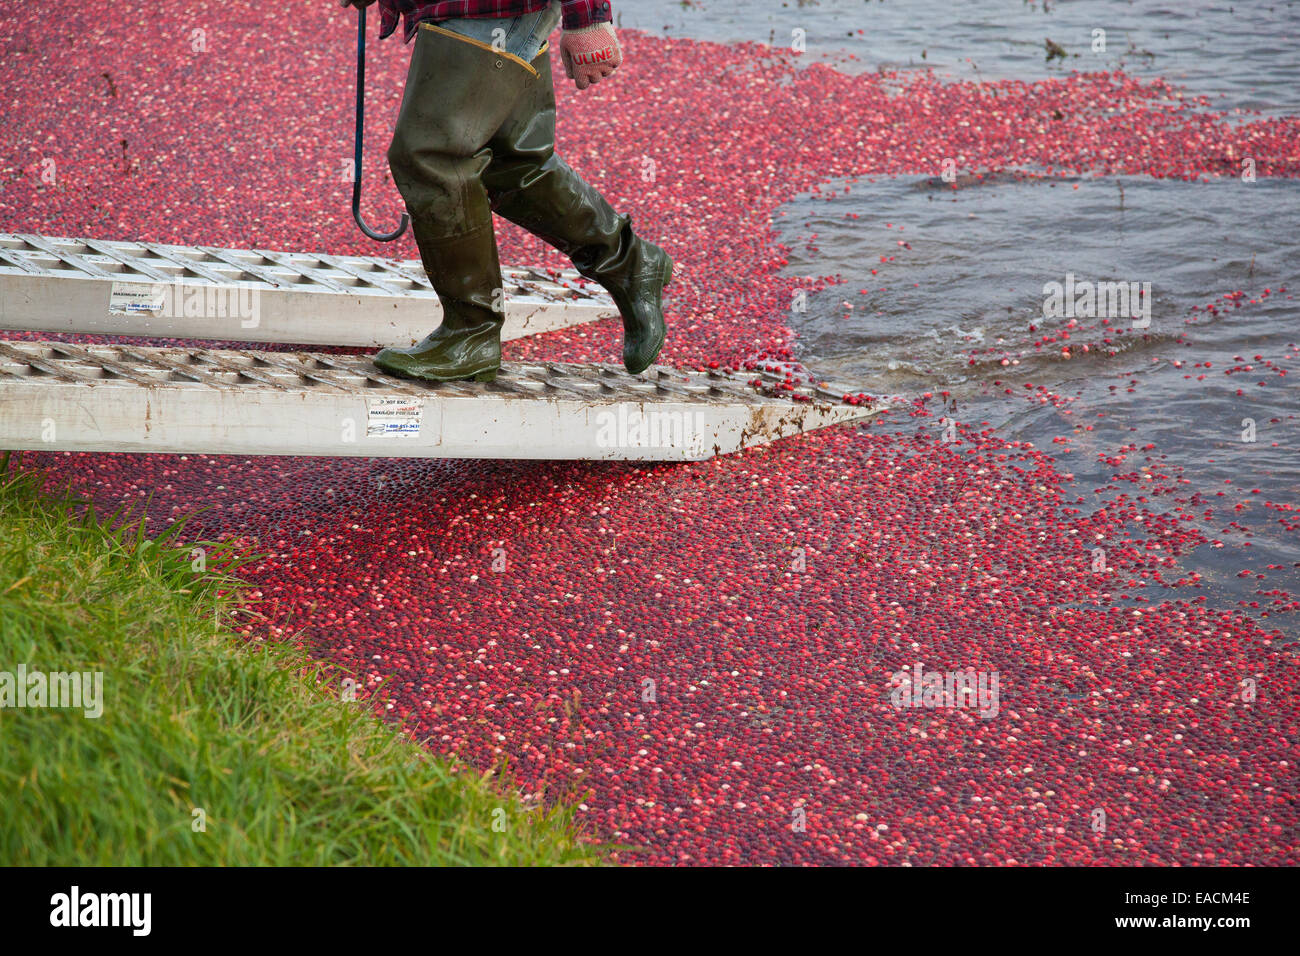 Farm worker exiting flooded cranberry marsh on metal tractor ramp Stock Photo